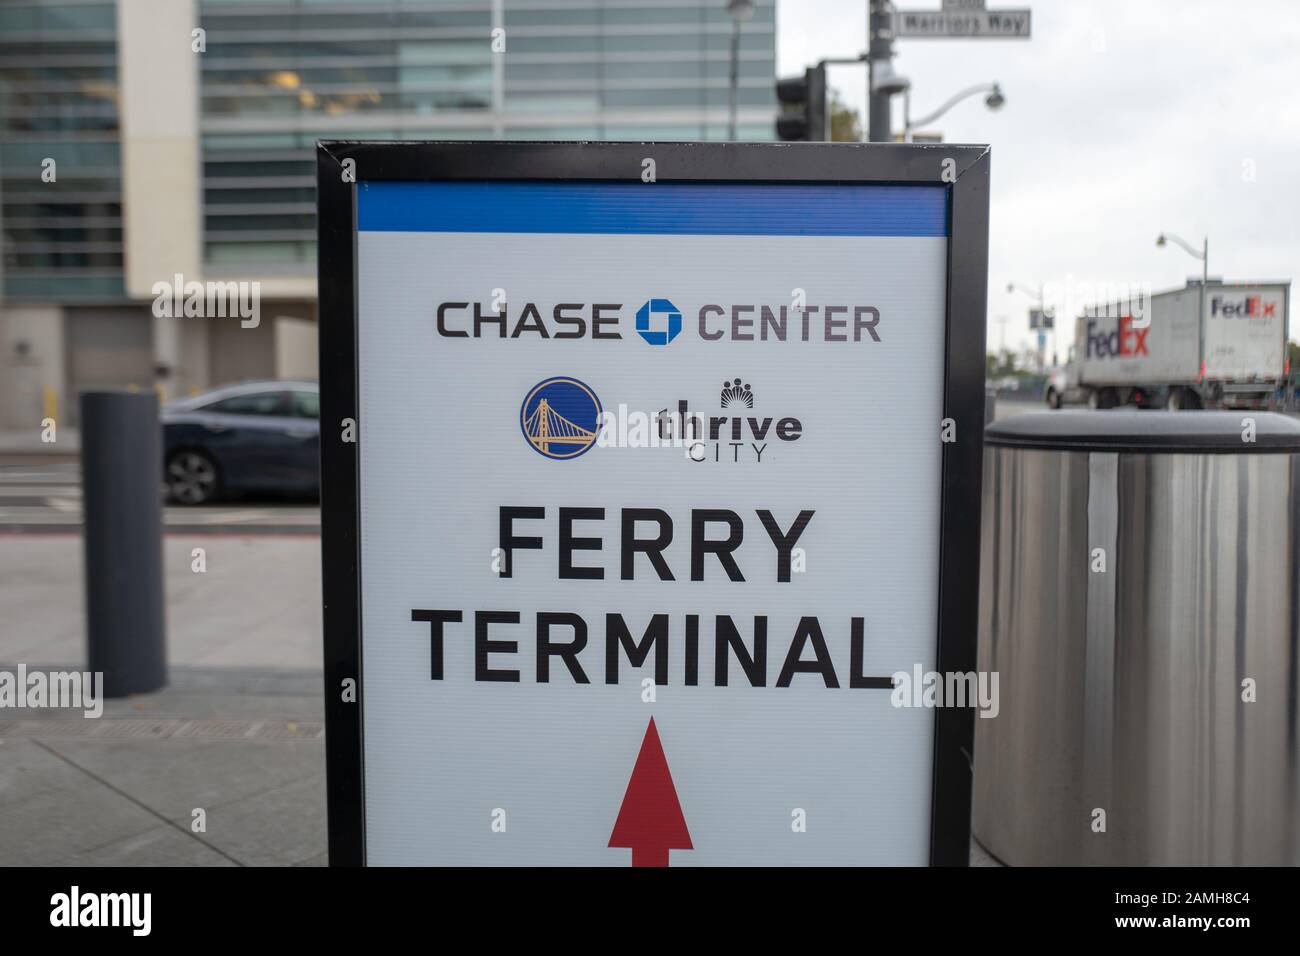 Ferry terminal signage at Chase Center, the new home of the Golden State Warriors NBA basketball team in the Mission Bay neighborhood of San Francisco, California, December 5, 2019. () Stock Photo